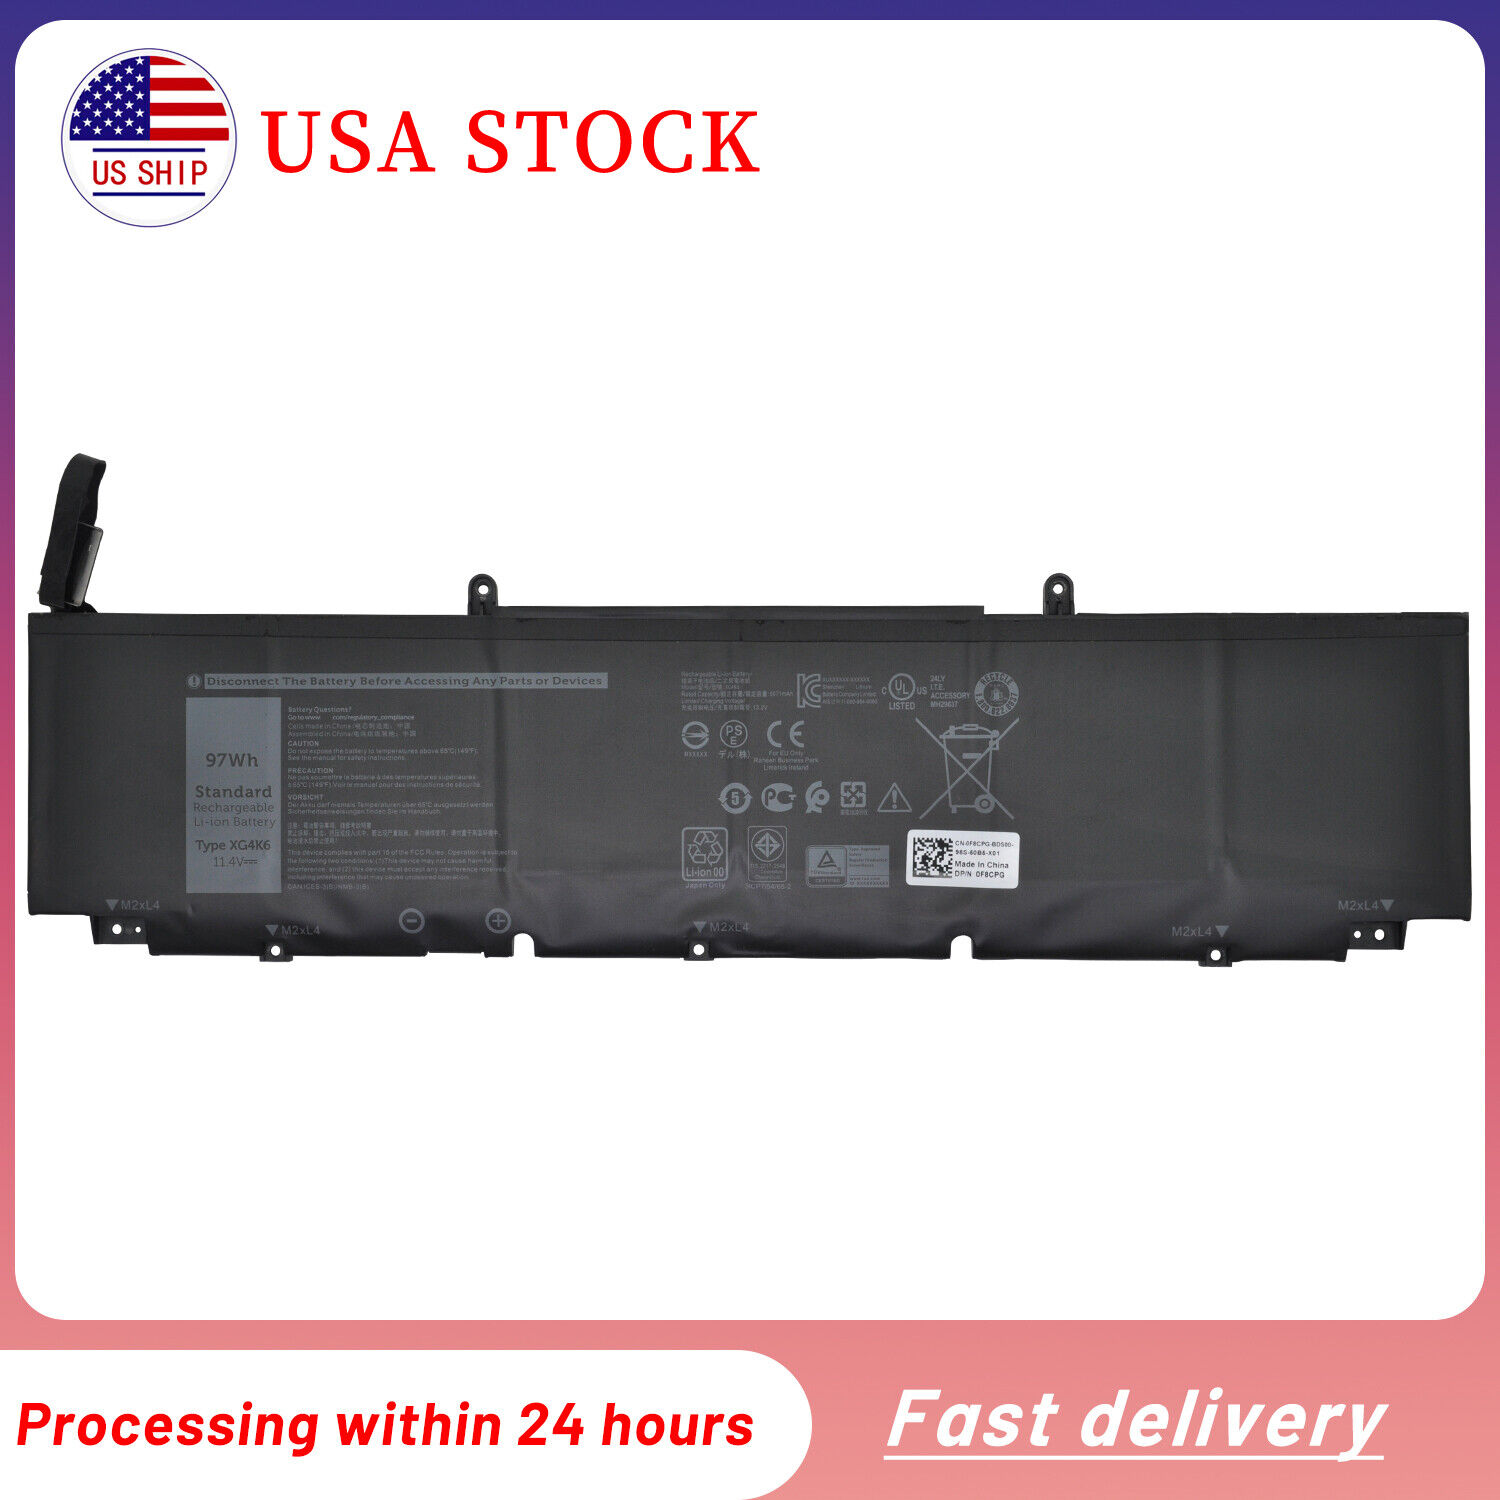 New XG4K6 F8CPG 01RR3 97Wh Battery for Dell XPS 17 9700 9710 Precision 5750 